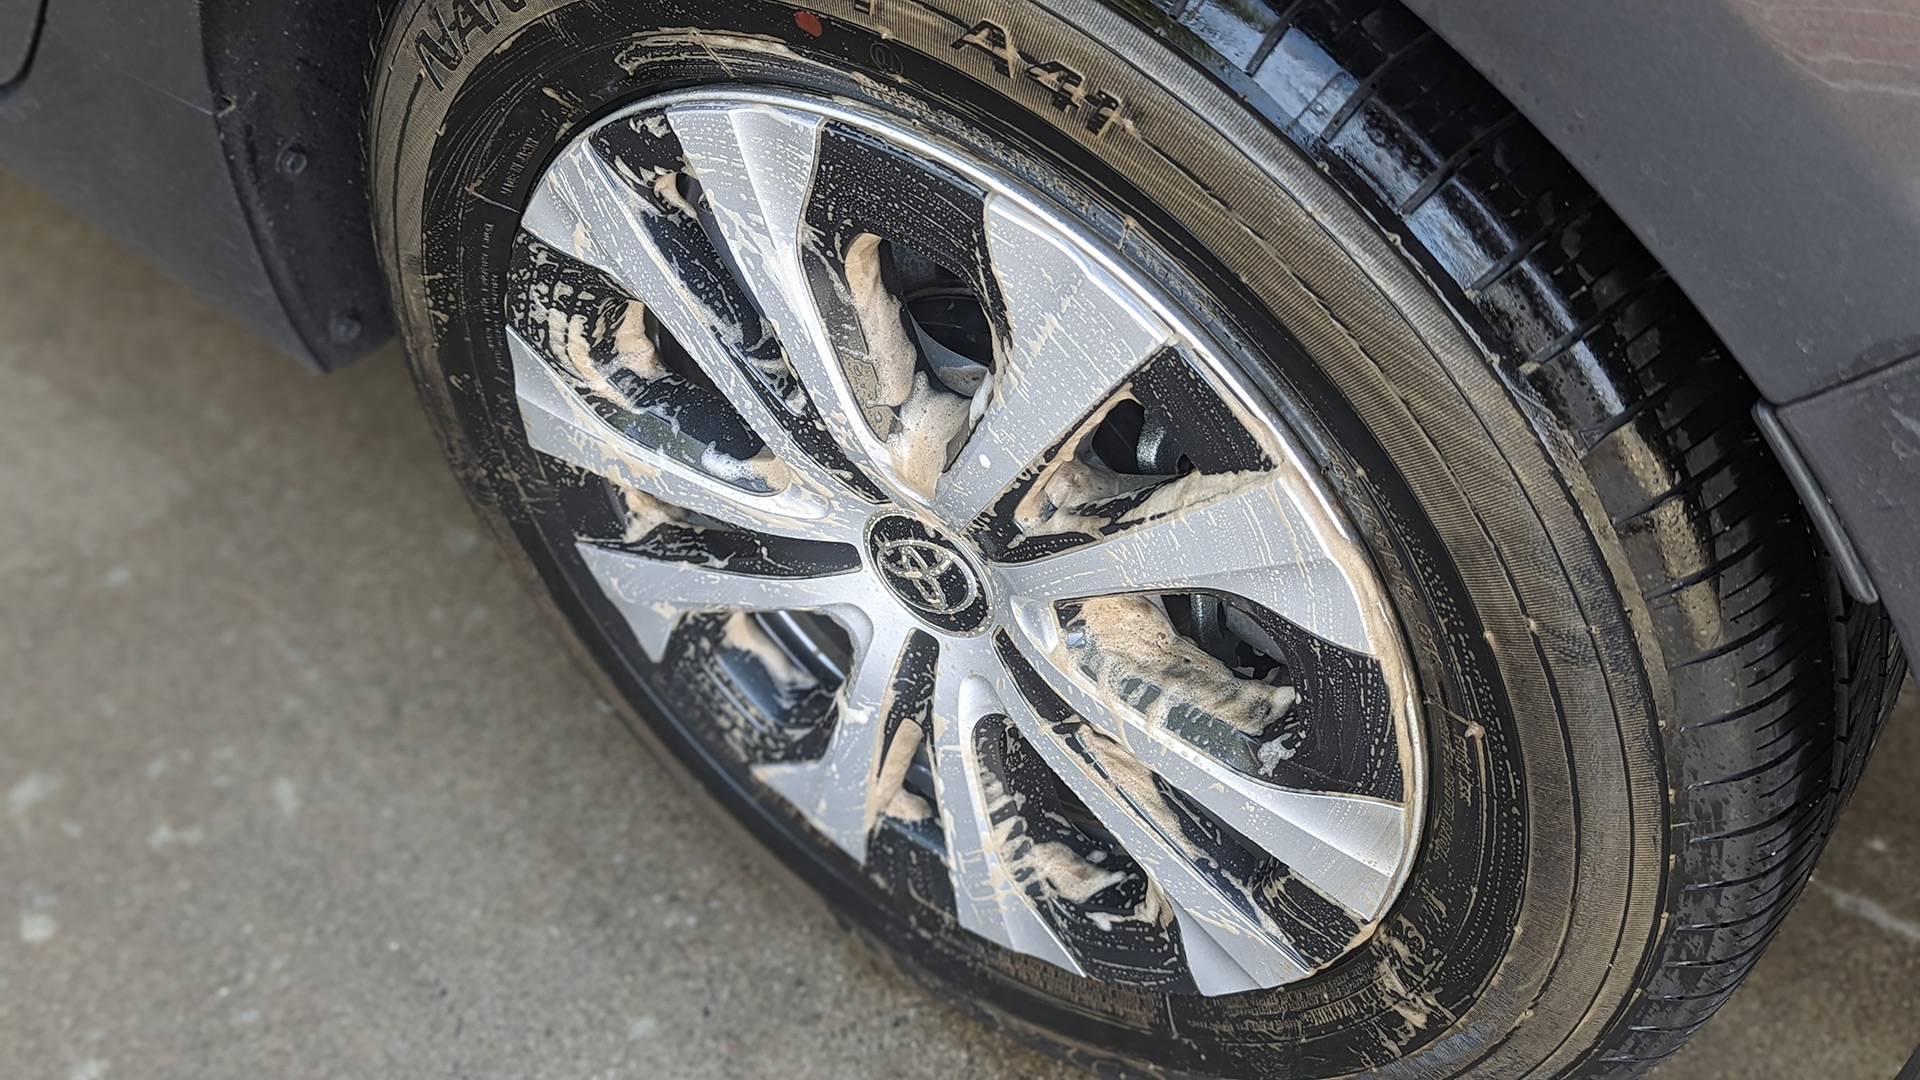 Best Alloy Wheel Cleaners - 3 Best Wheel Cleaners Ever!